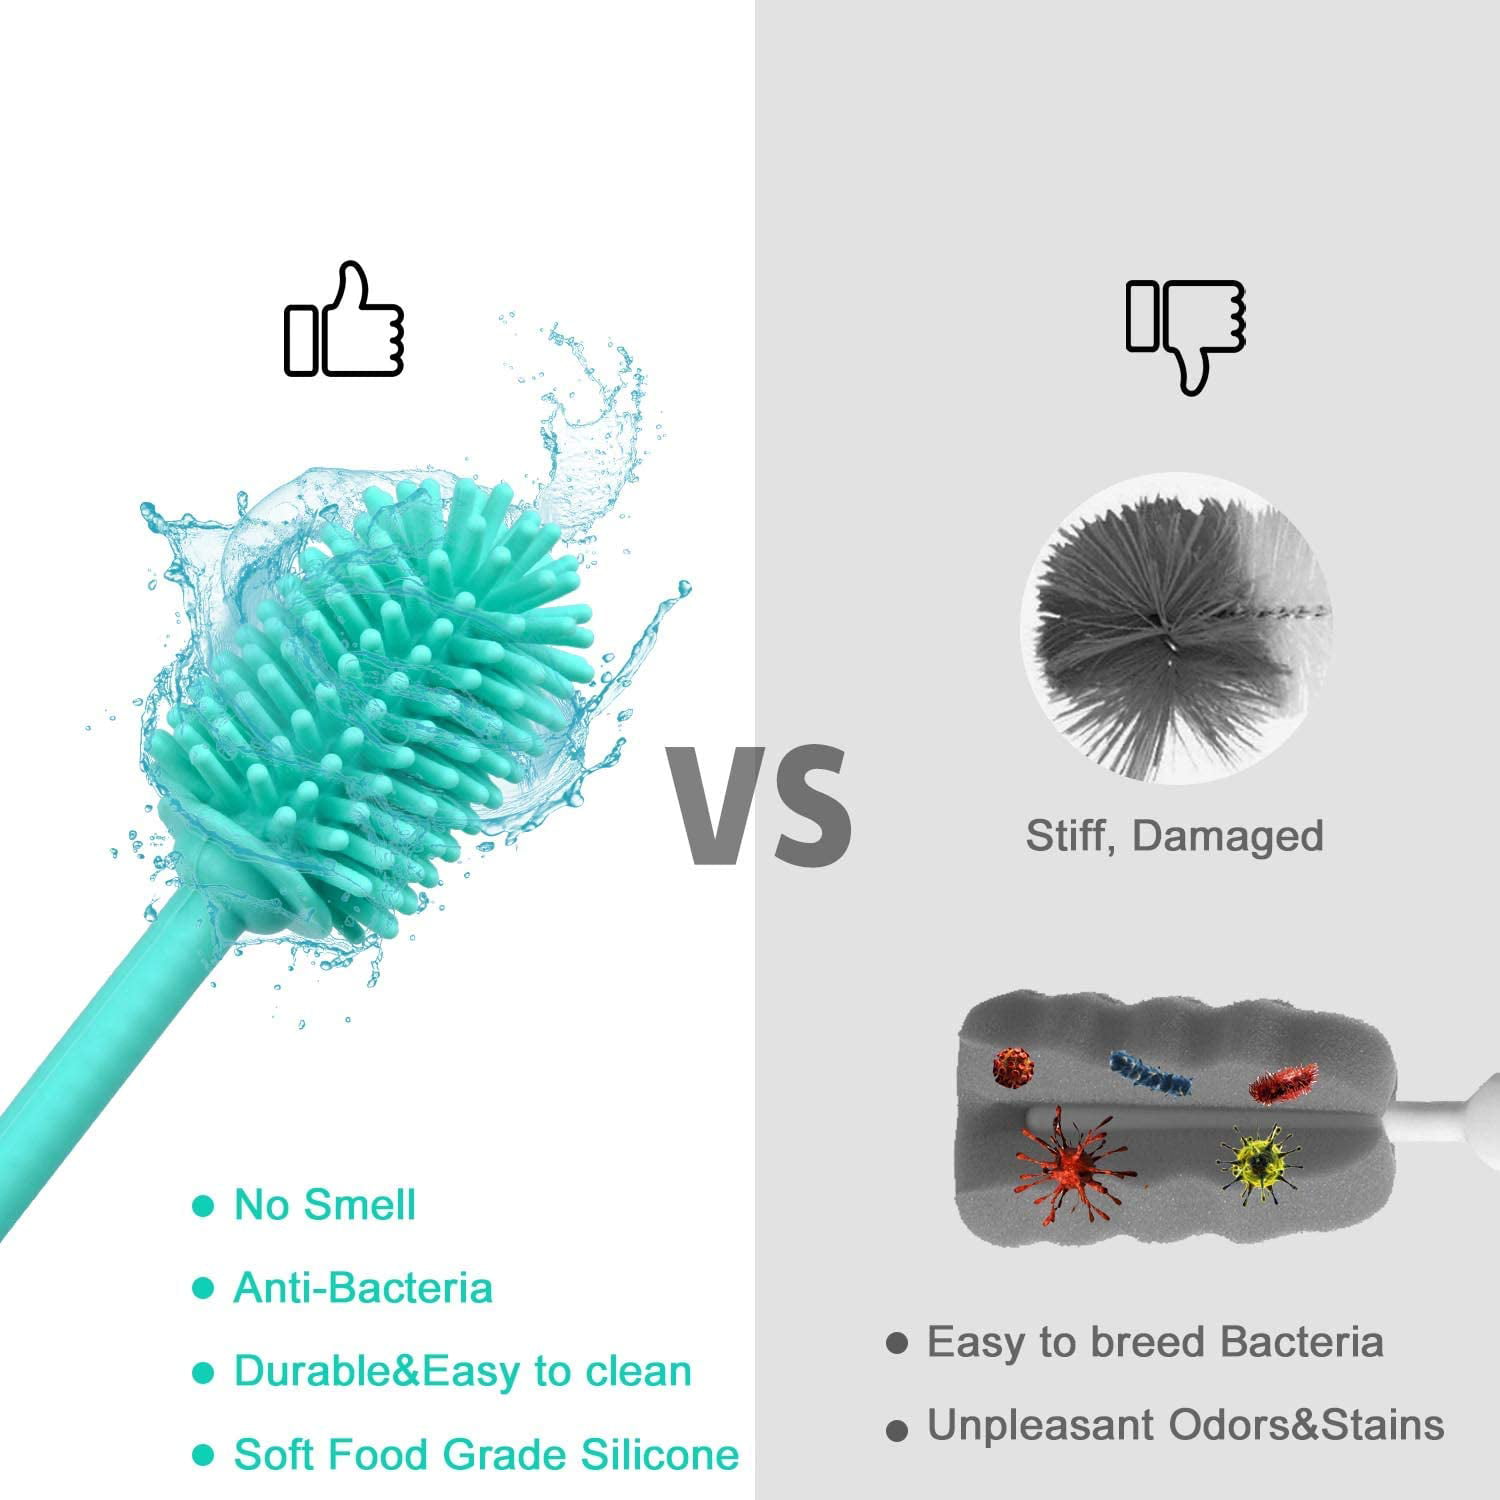 Long Bottle Brush Cleaner Set (3-in-1) and Straw Brushes  Thick and Thin  Brush with Straw Cleaners for Washing Baby Bottle, Water Bottles, Mugs 